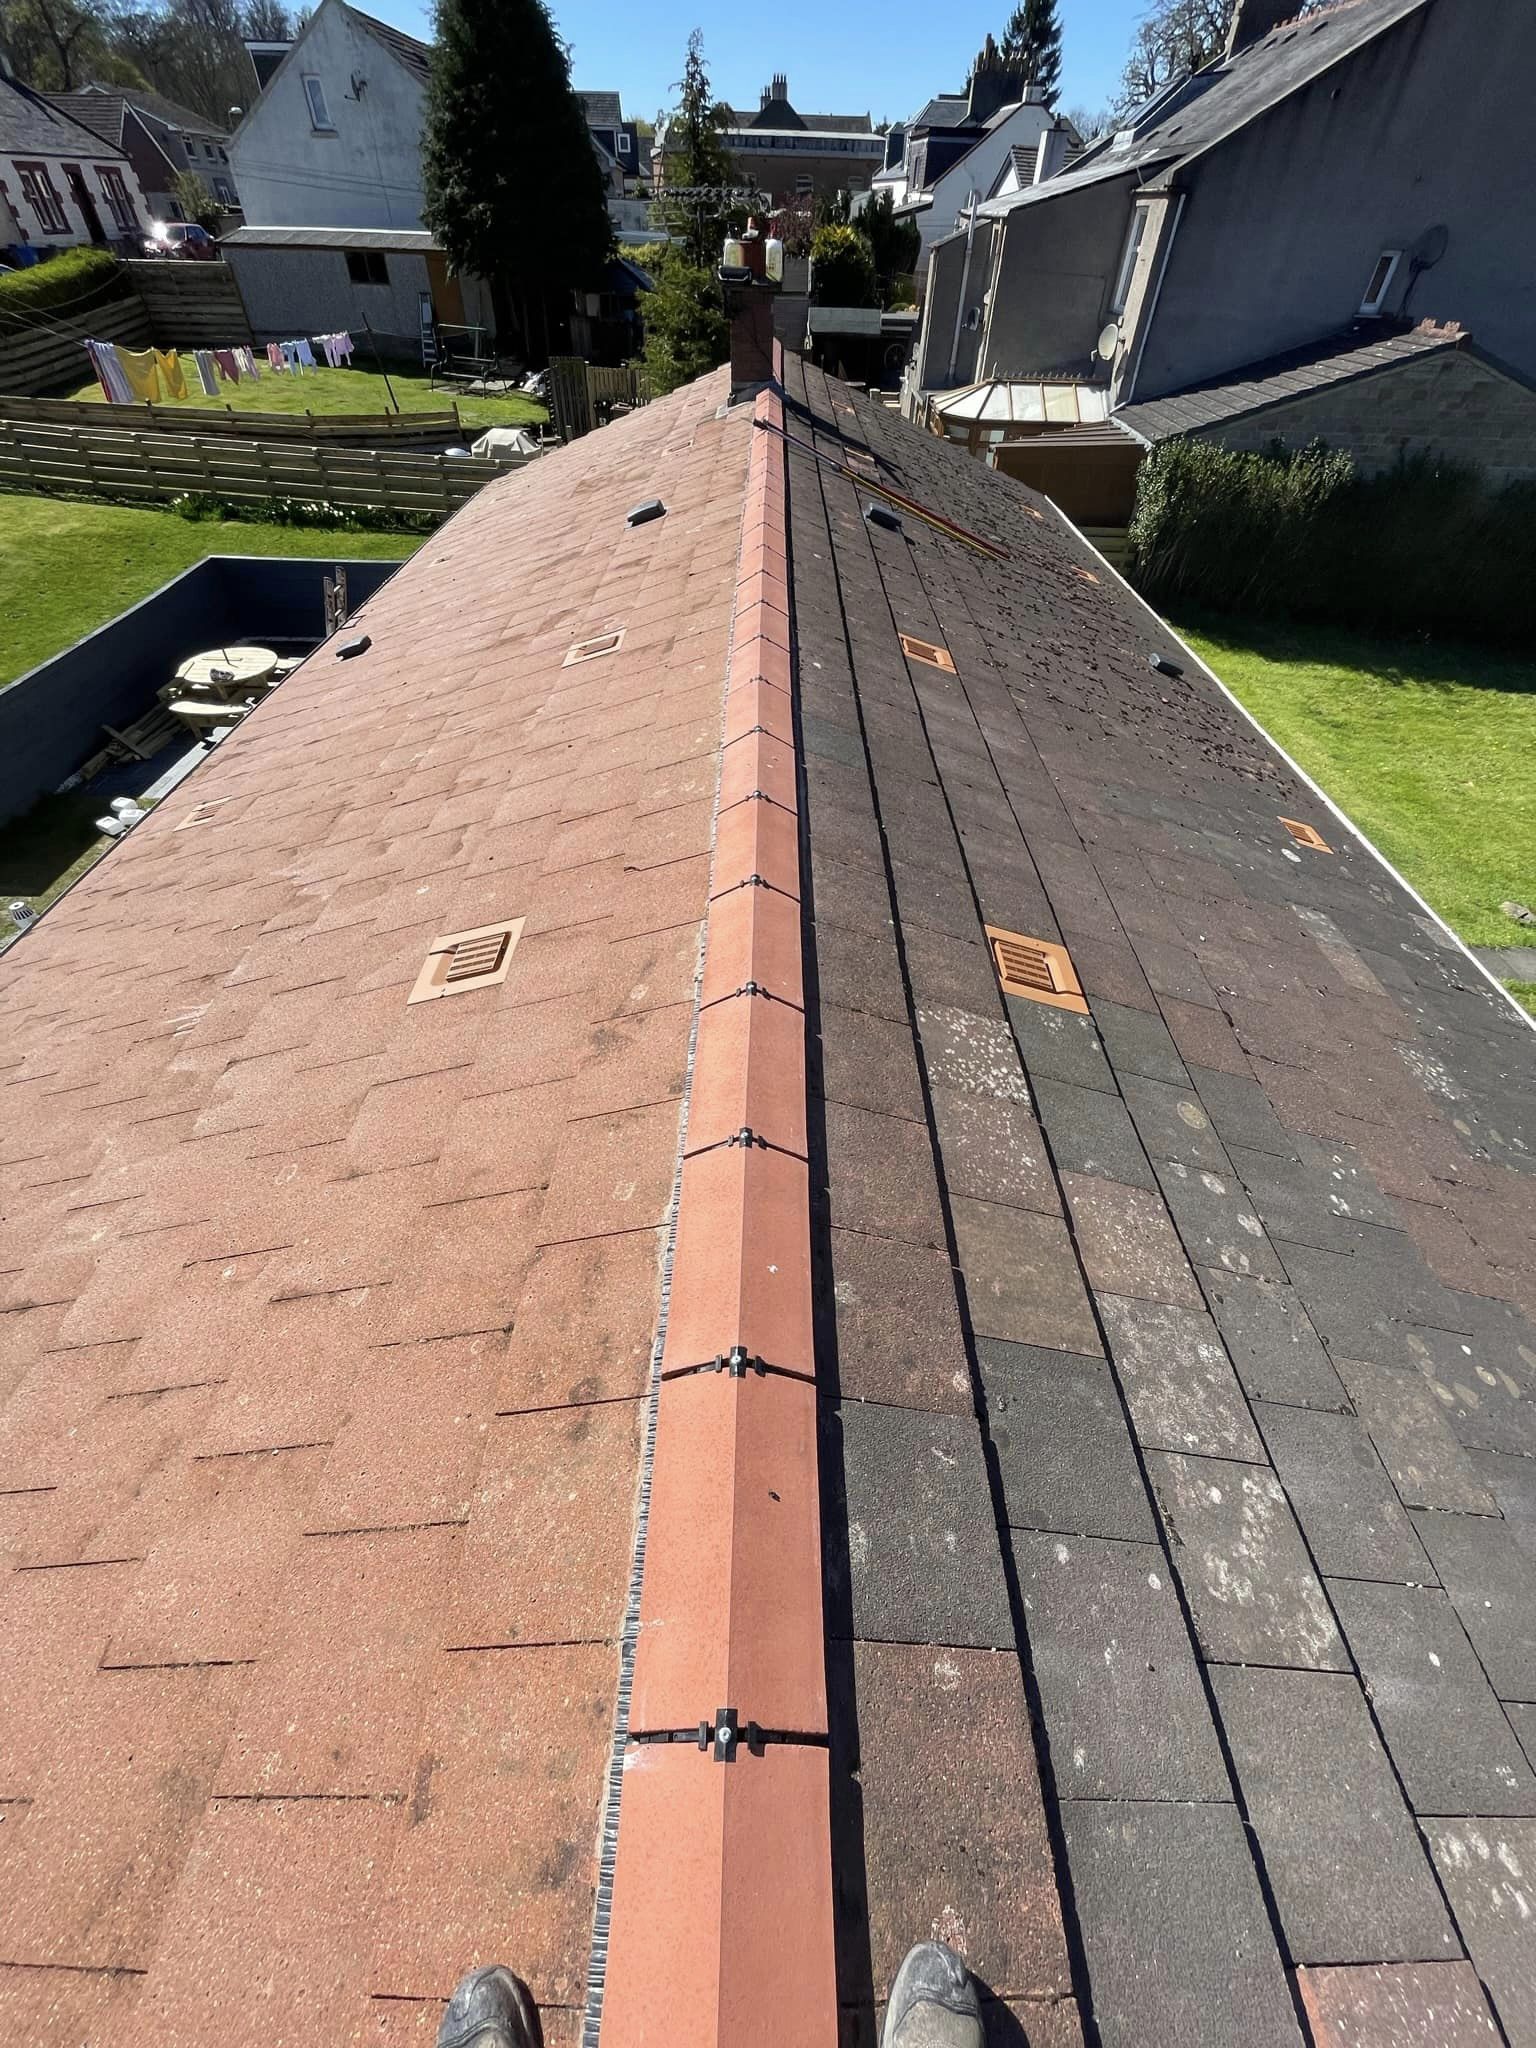 Roof Cleaning in progress